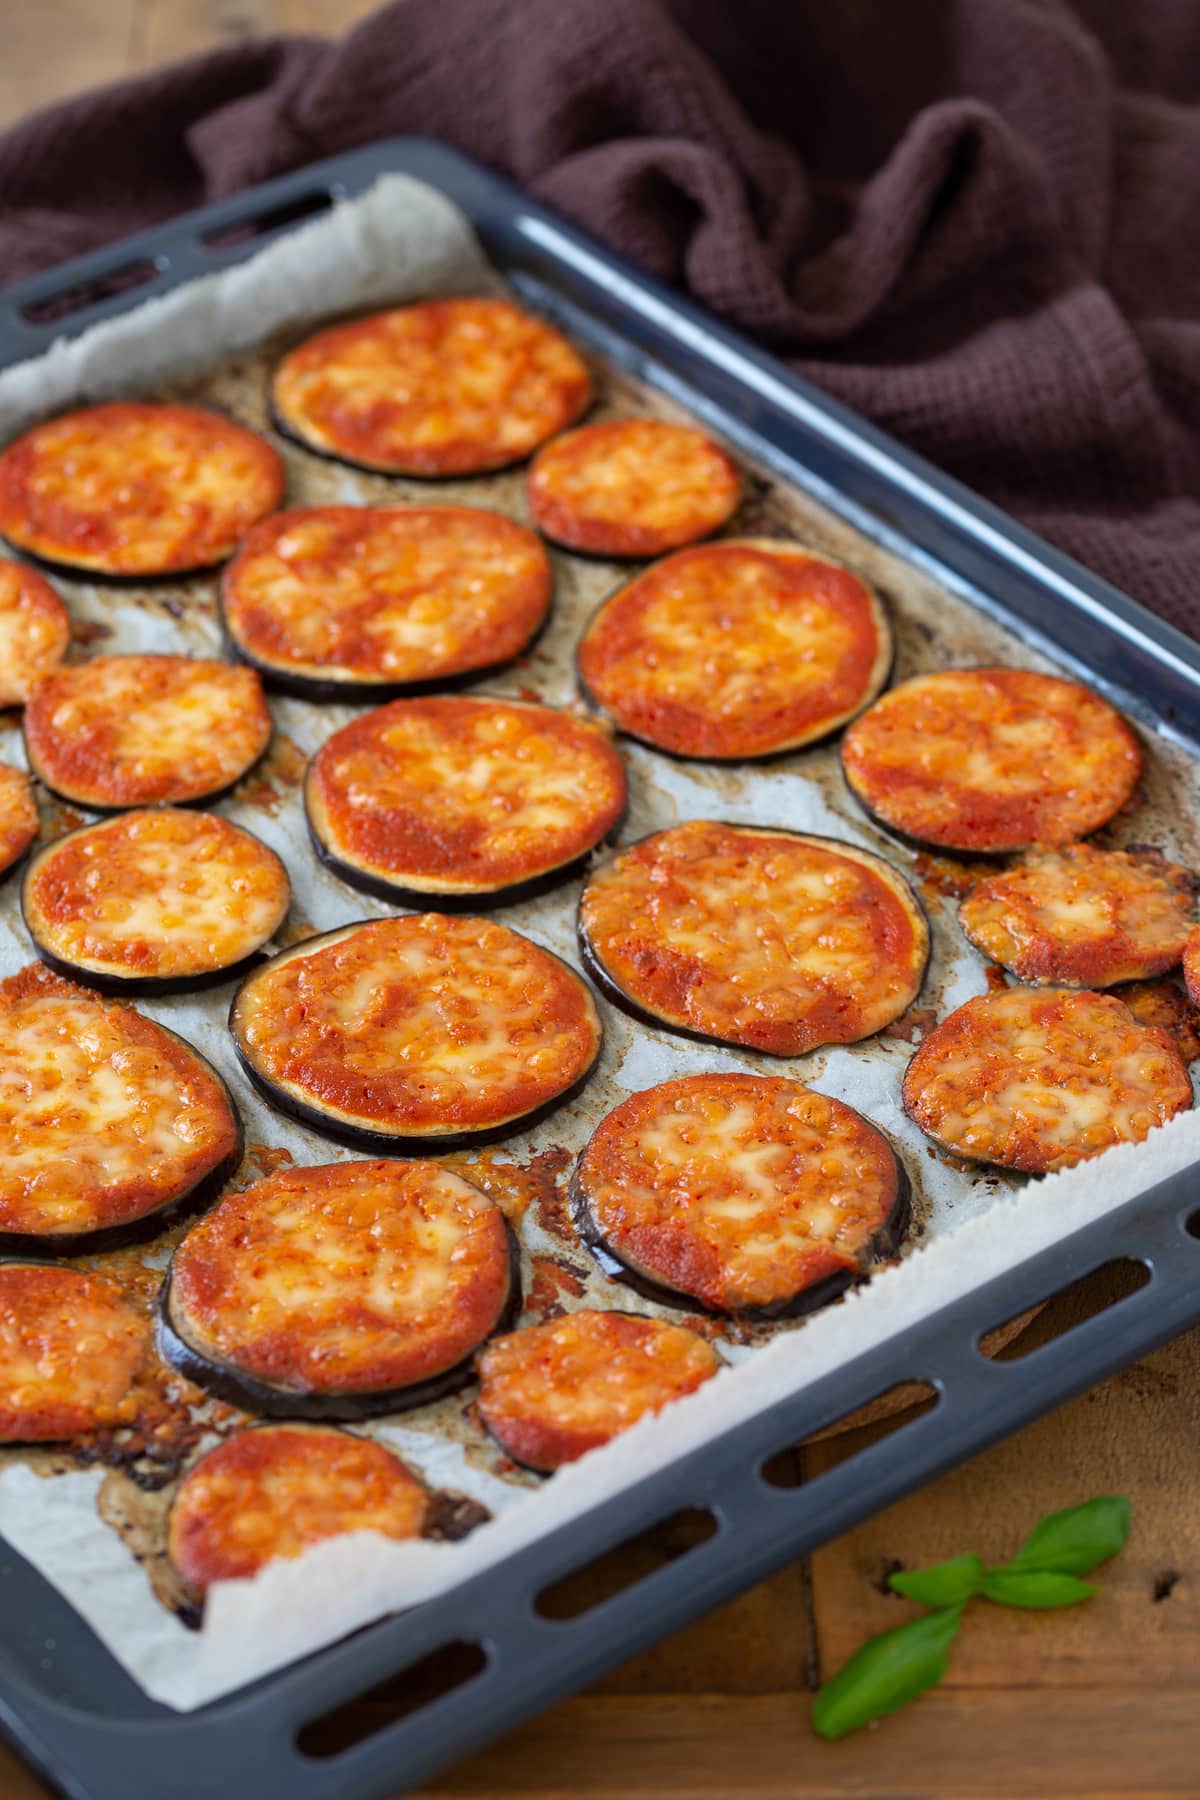 Baked eggplant pizza bites on an oven tray.